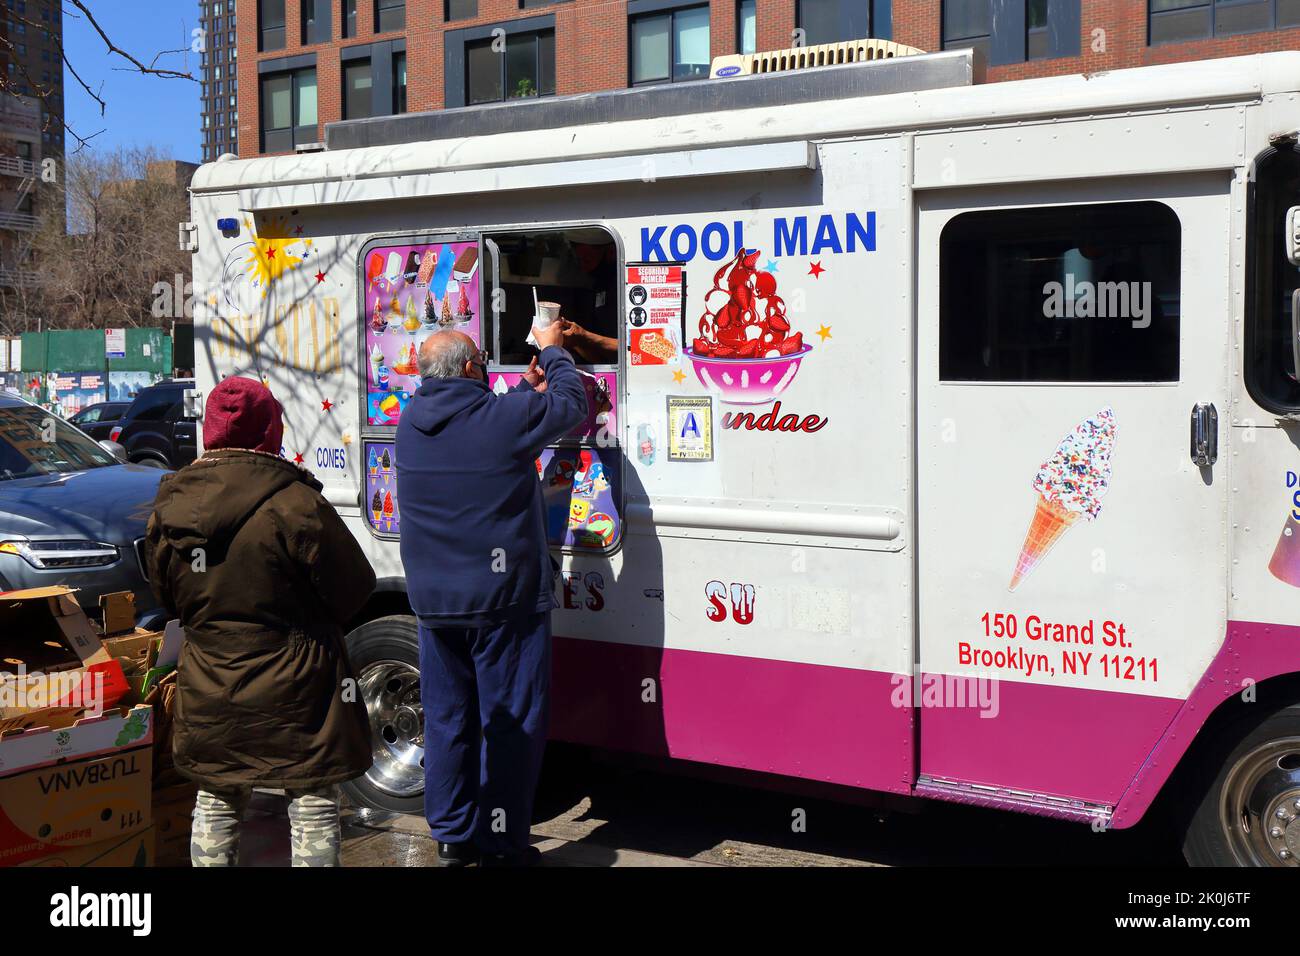 People buying ice cream desserts from an ice cream truck in the Lower East Side of Manhattan, New York. Stock Photo